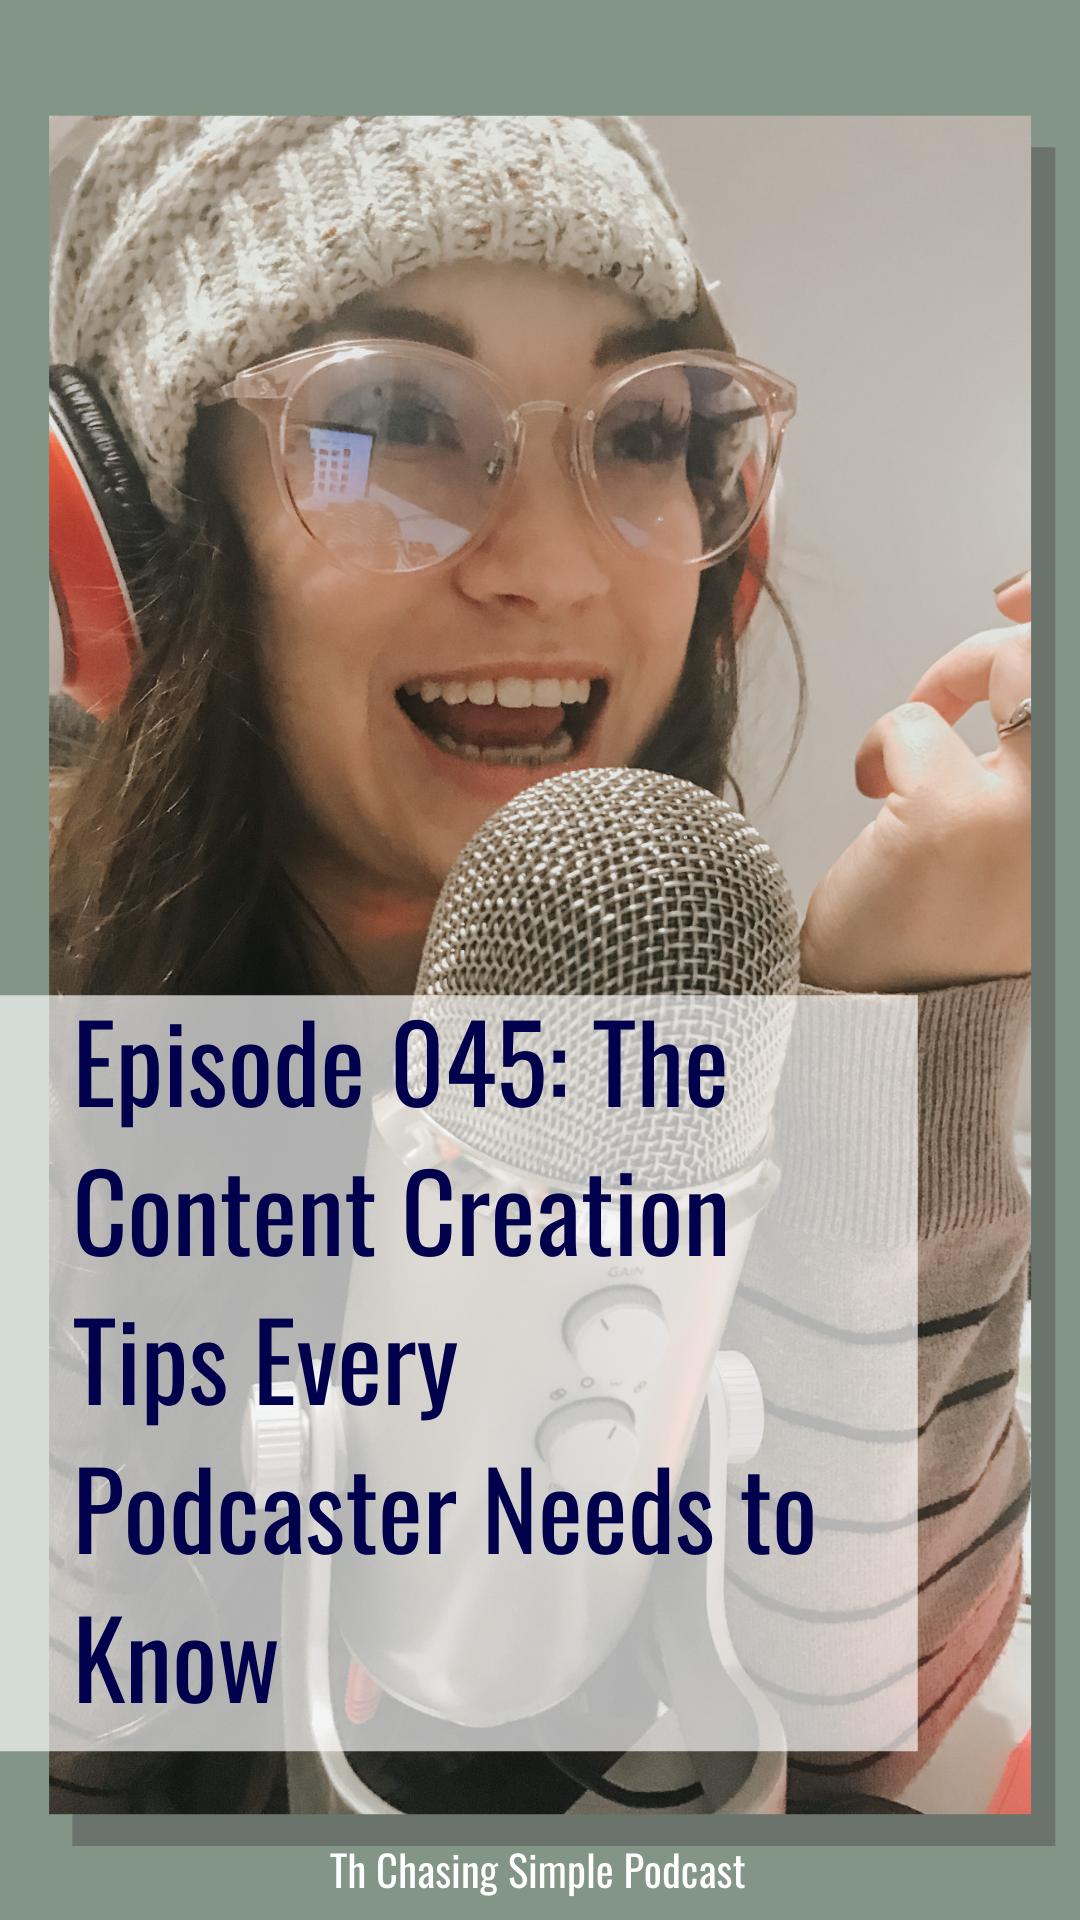 If you find yourself spending a large chunk of your working hours on podcast content creation, this episode is for you.